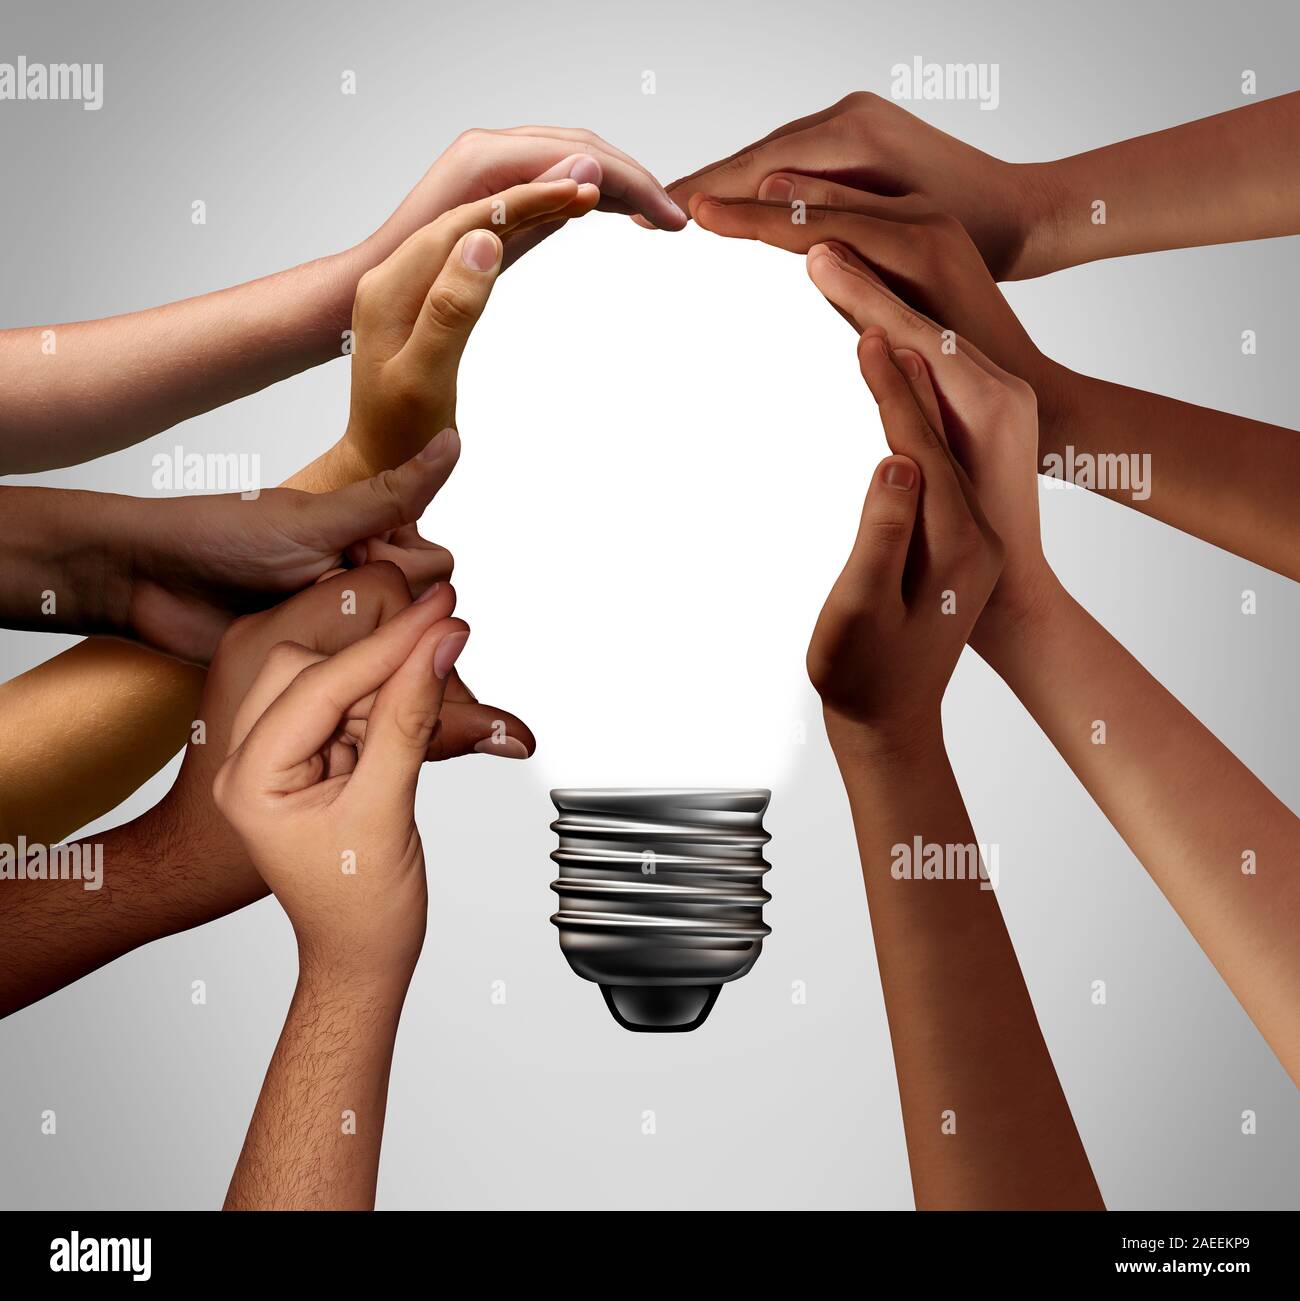 Human idea bulb concept as diverse creative people joining together with 3D illustration elements. Stock Photo